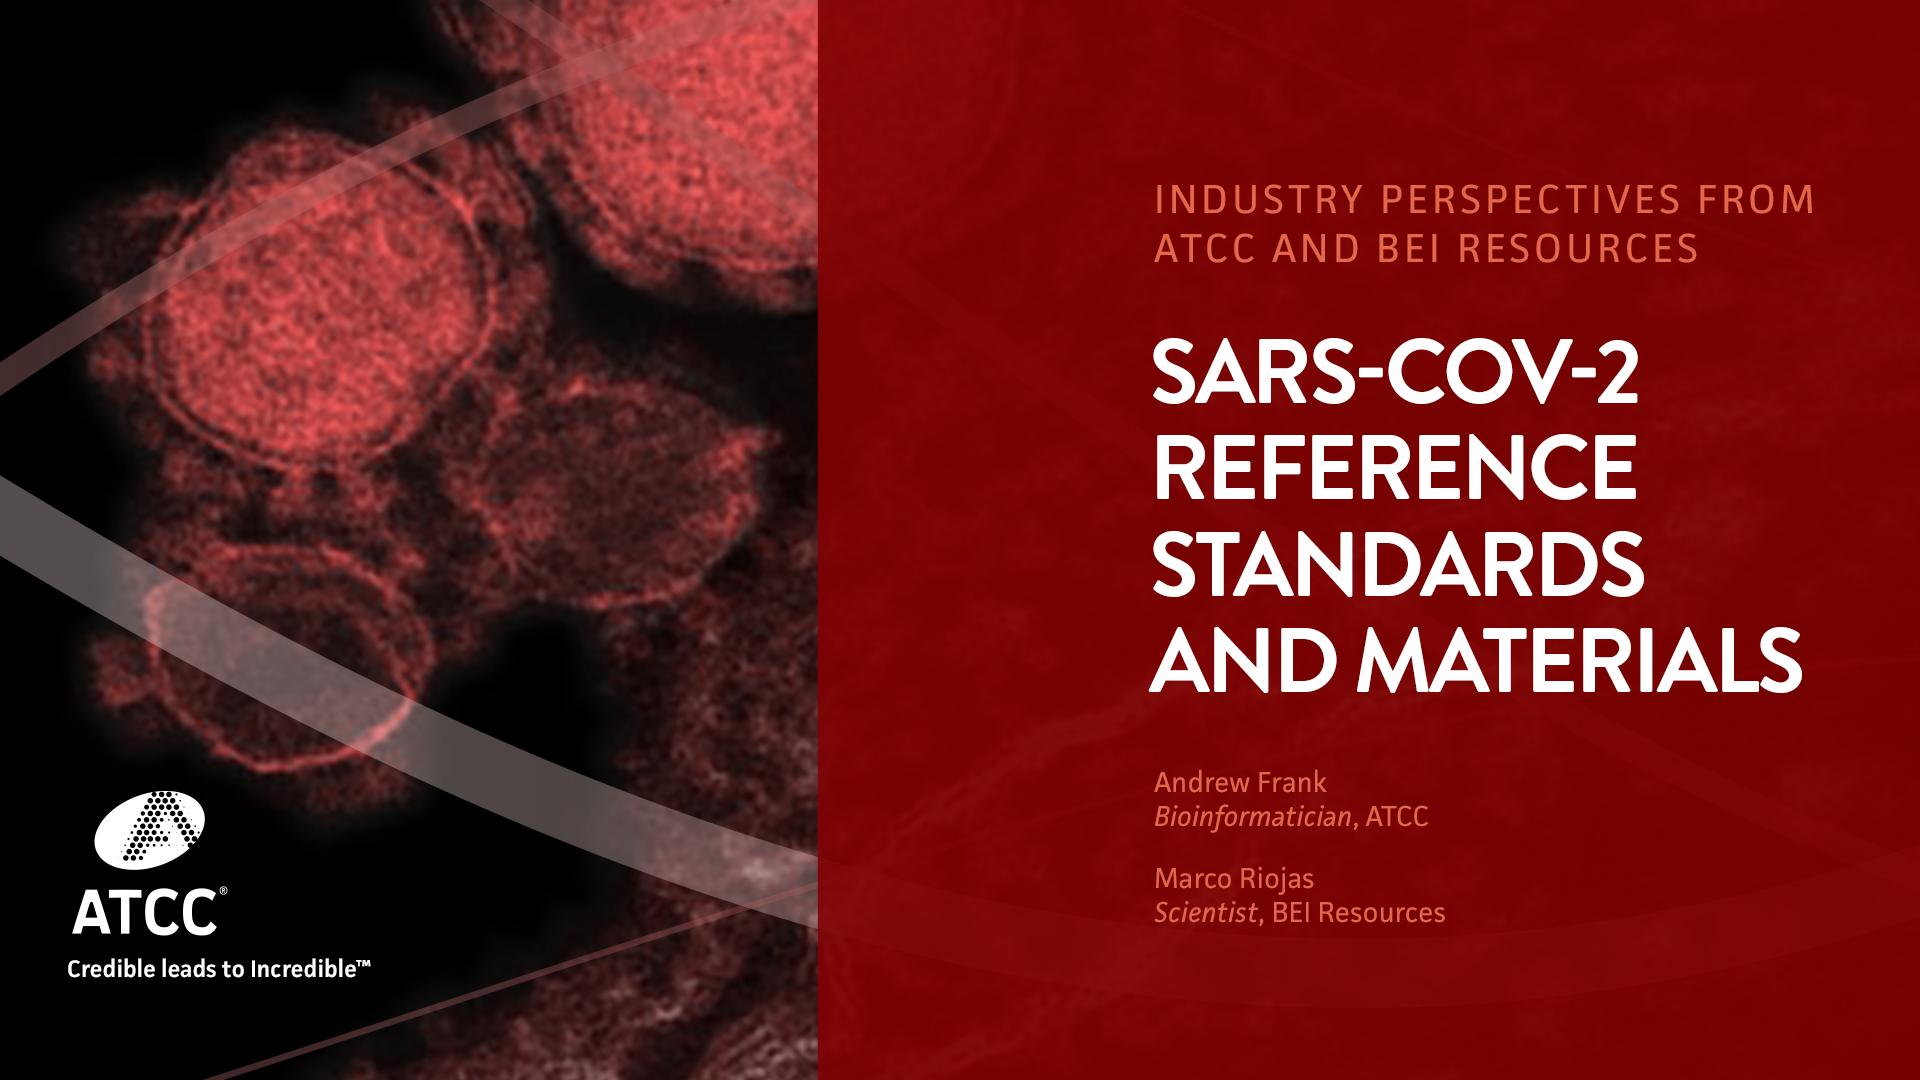 SARS-COV-2 - Reference Standards and Materials